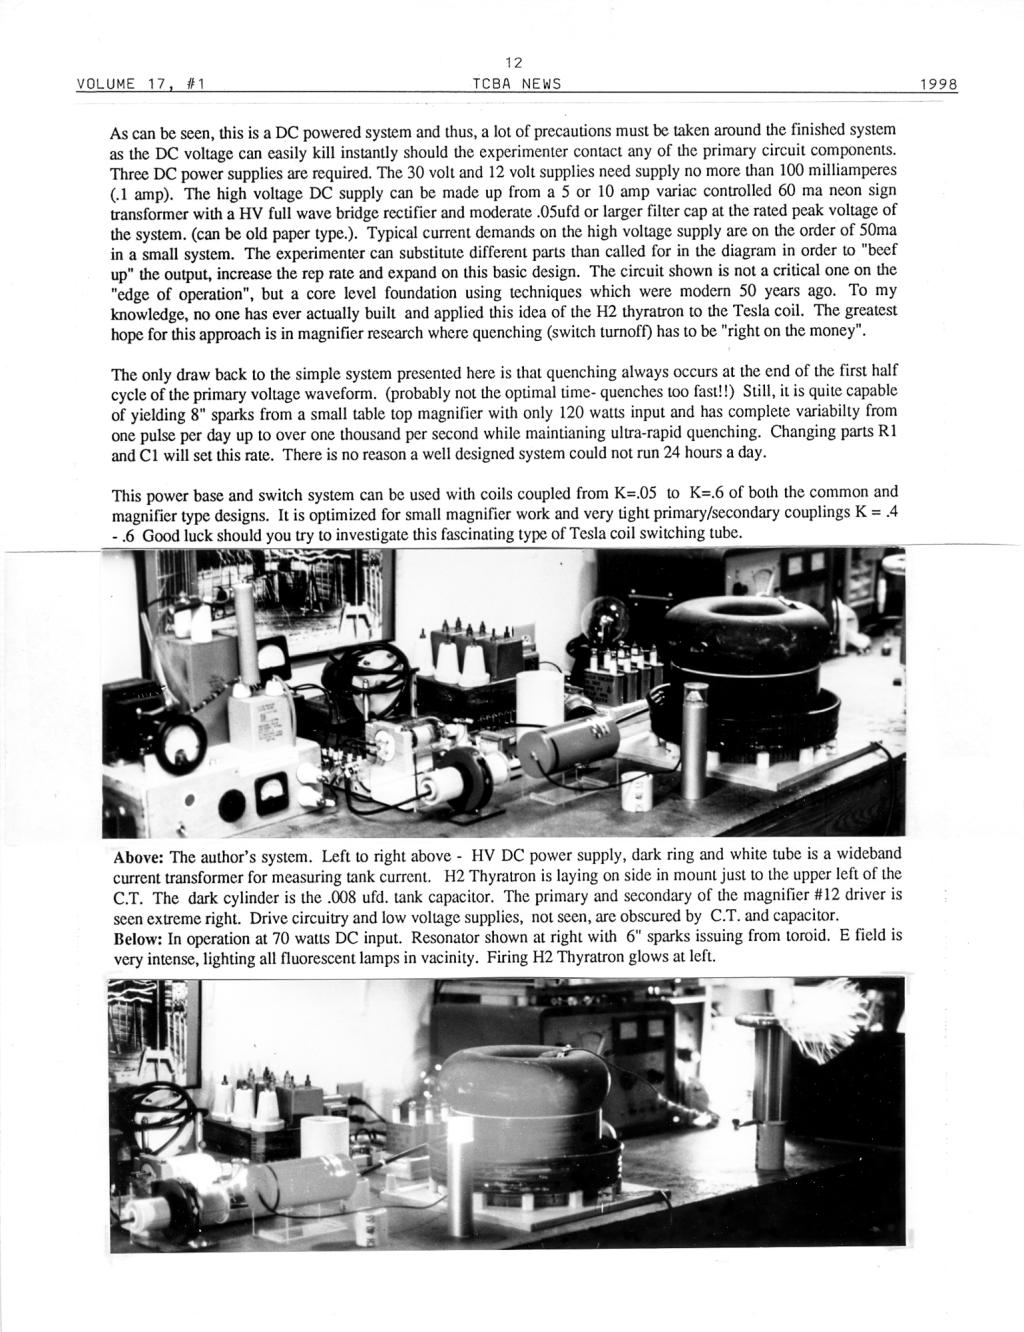 TCBA Volume 17 - Issue 1 - Page 12 of 18